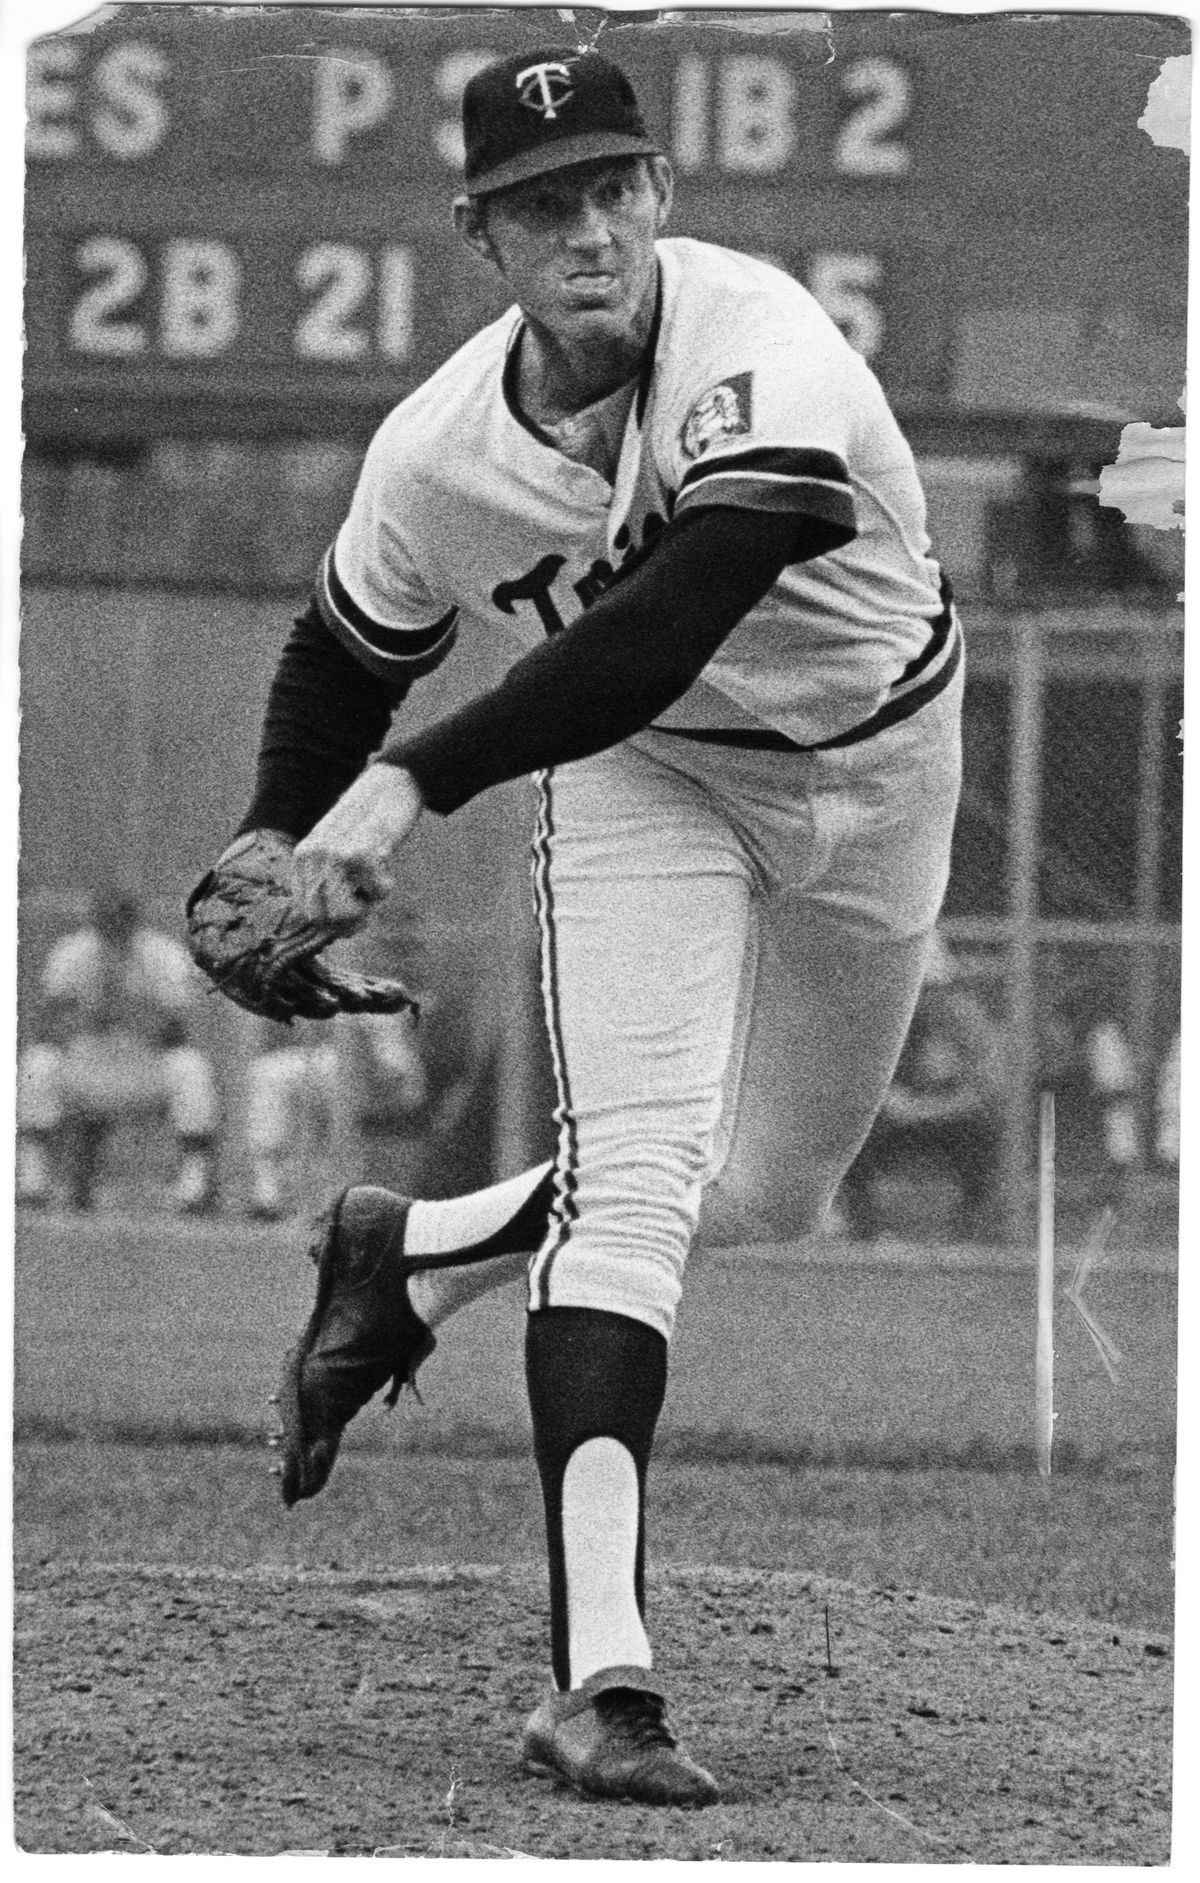 Minnesota Twins pitcher Jim Kaat in action during game vs. Texas May 28, 1972 at Metropolitan Stadium. Photo by Minneapolis Star staff photographer Charles Bjorgen.